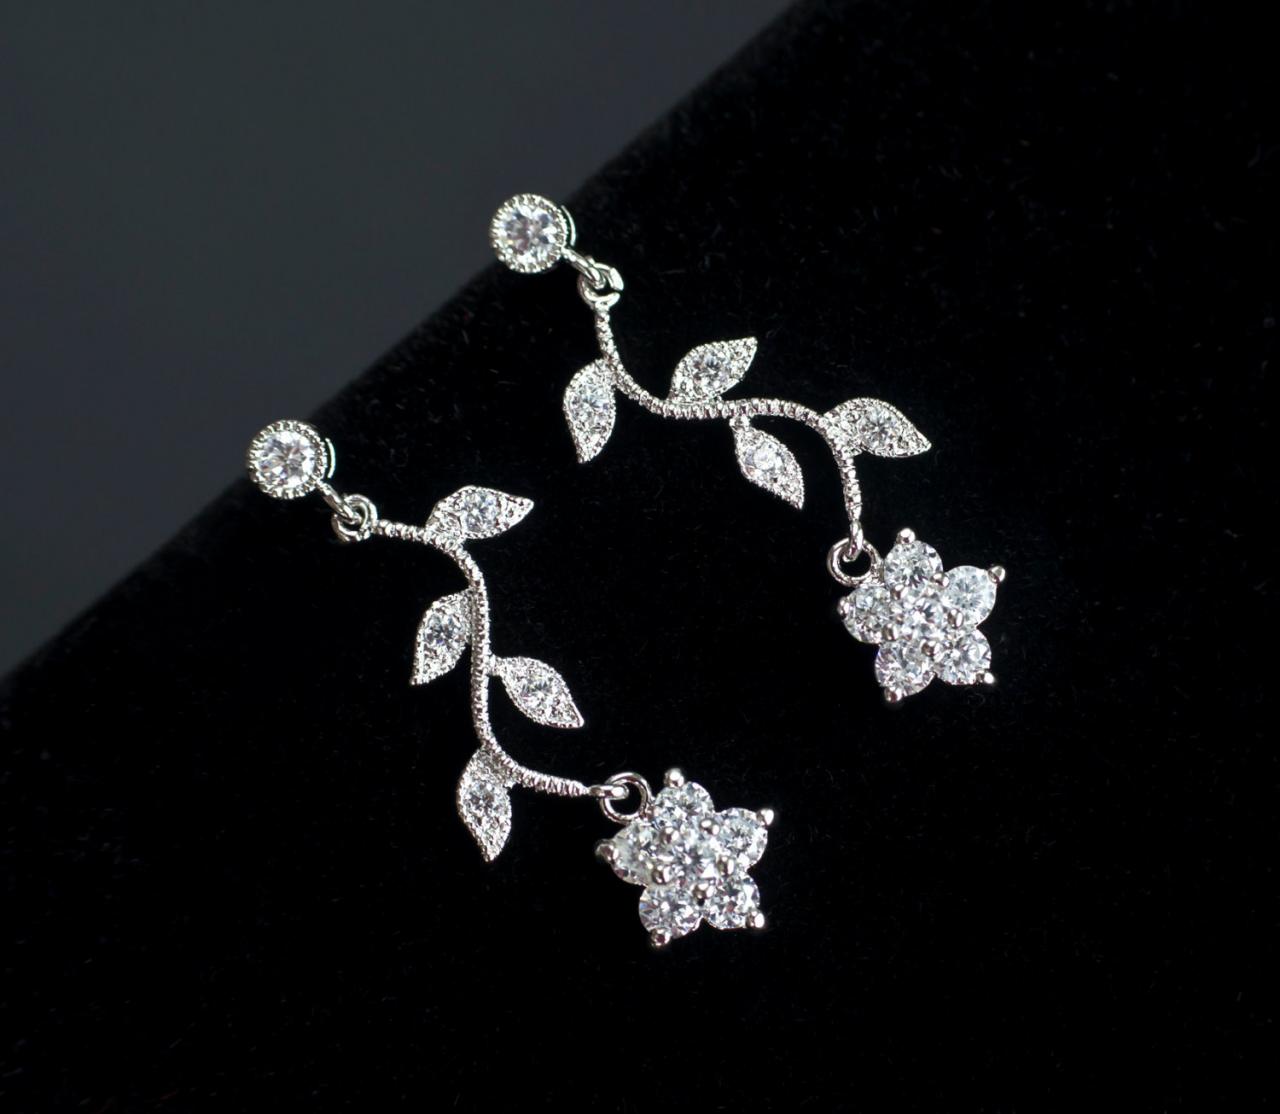 Bridal Earrings, Cubic Zirconia Flower And Branch Tree Earrings, Cz Floral Bridal Jewelry, Bridal Bridesmaids Earrings, Cz Wedding Jewelry